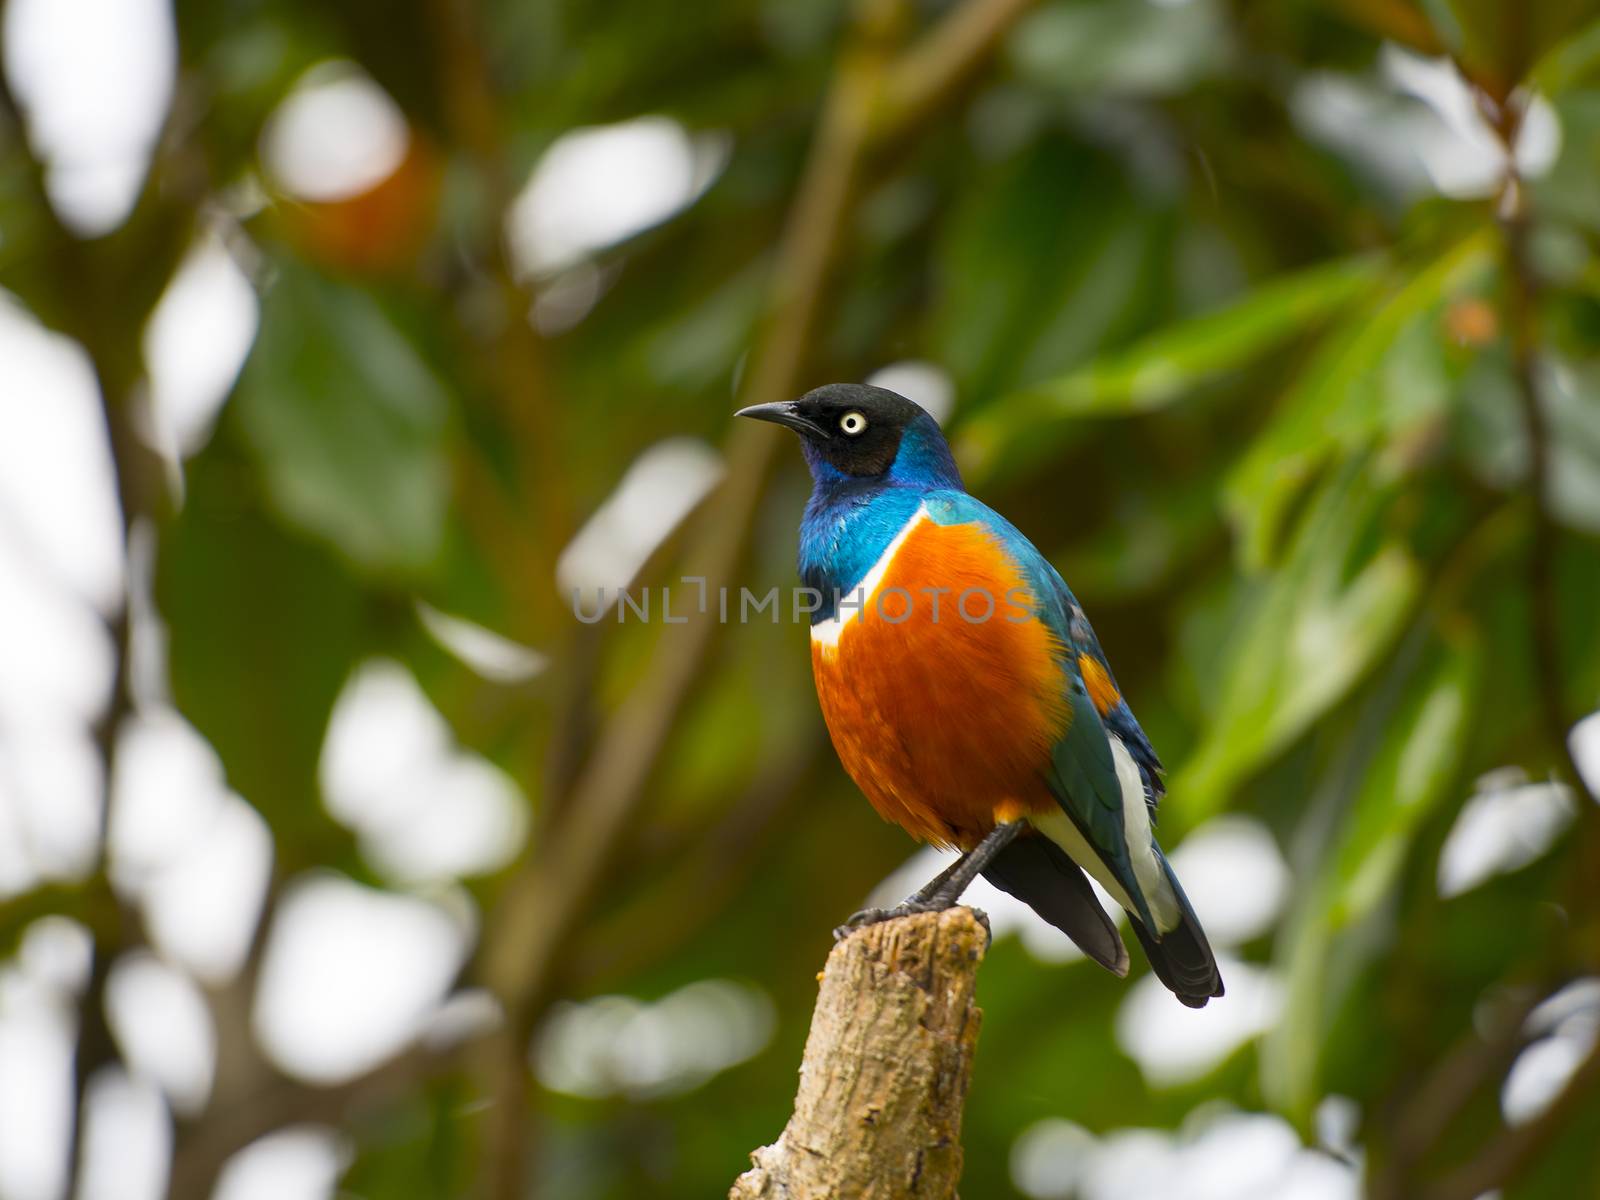 The superb starling (Lamprotornis superbus) is a member of the starling family of birds. It can commonly be found in East Africa, including Ethiopia, Somalia, Uganda, Kenya, and Tanzania. It was formerly known as Spreo superbus.

Adults have black heads and iridescent blue-to-green back, upper breast, wings, and tail. The belly is red-orange, separated from the blue breast by a white bar. The under tail coverts and the wing linings are white. Juveniles have duller plumage with no more than a suggestion of the white breast band. Their irises are brown, later grayish white, eventually the adult's purple.

The superb starling has a long and loud song consisting of trills and chatters. At midday it gives a softer song of repeated phrases.